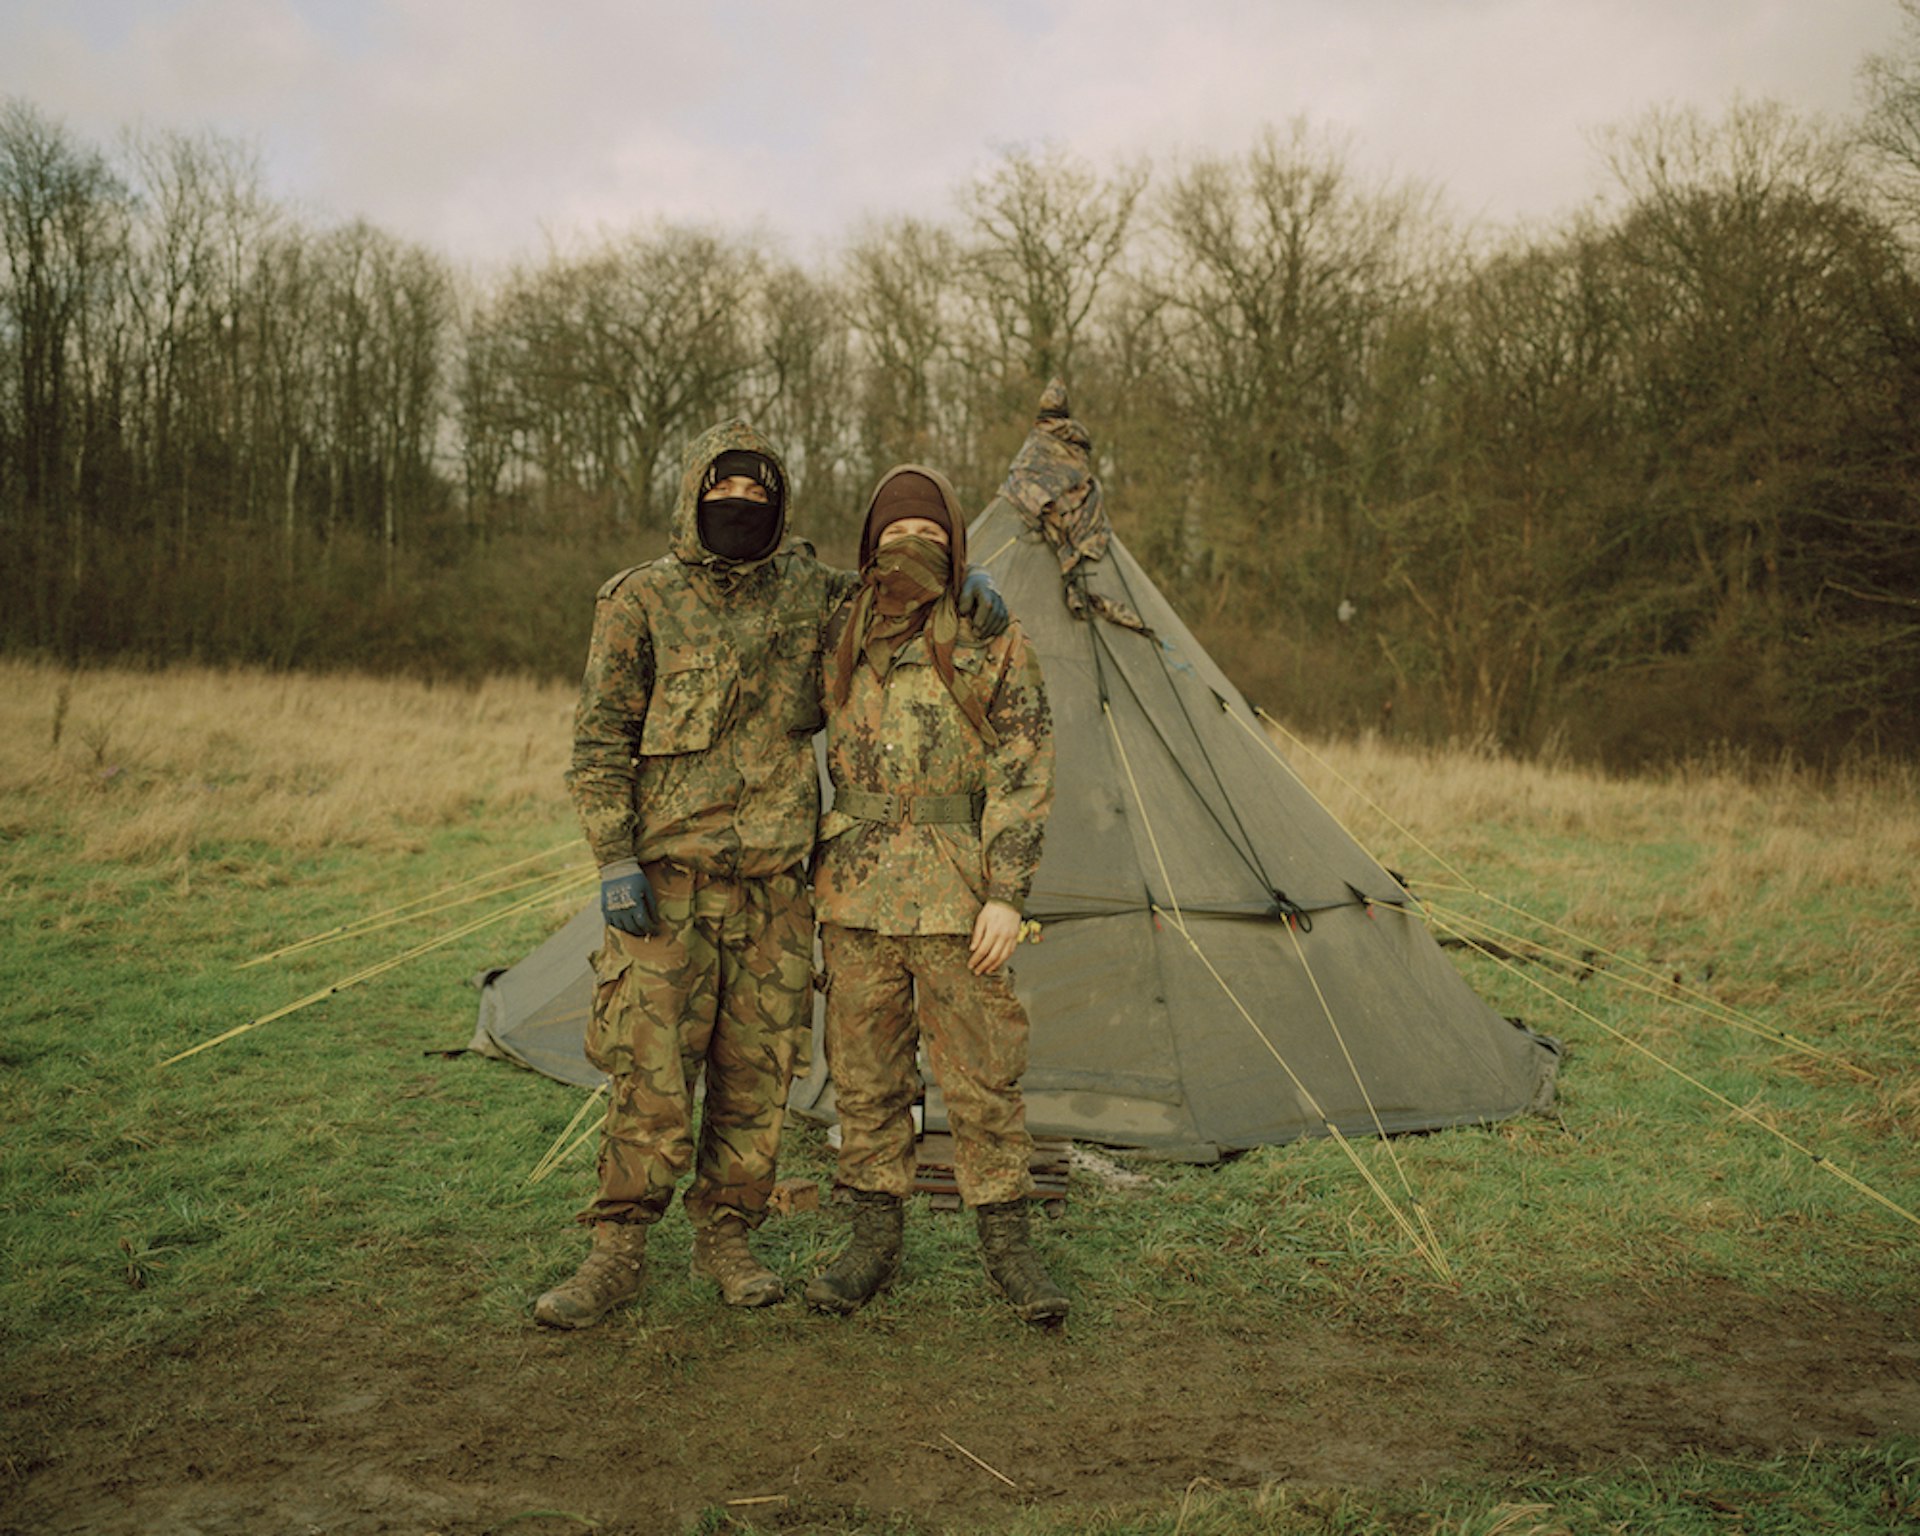 Two ecoactivists in camouflage pose in front of their tent